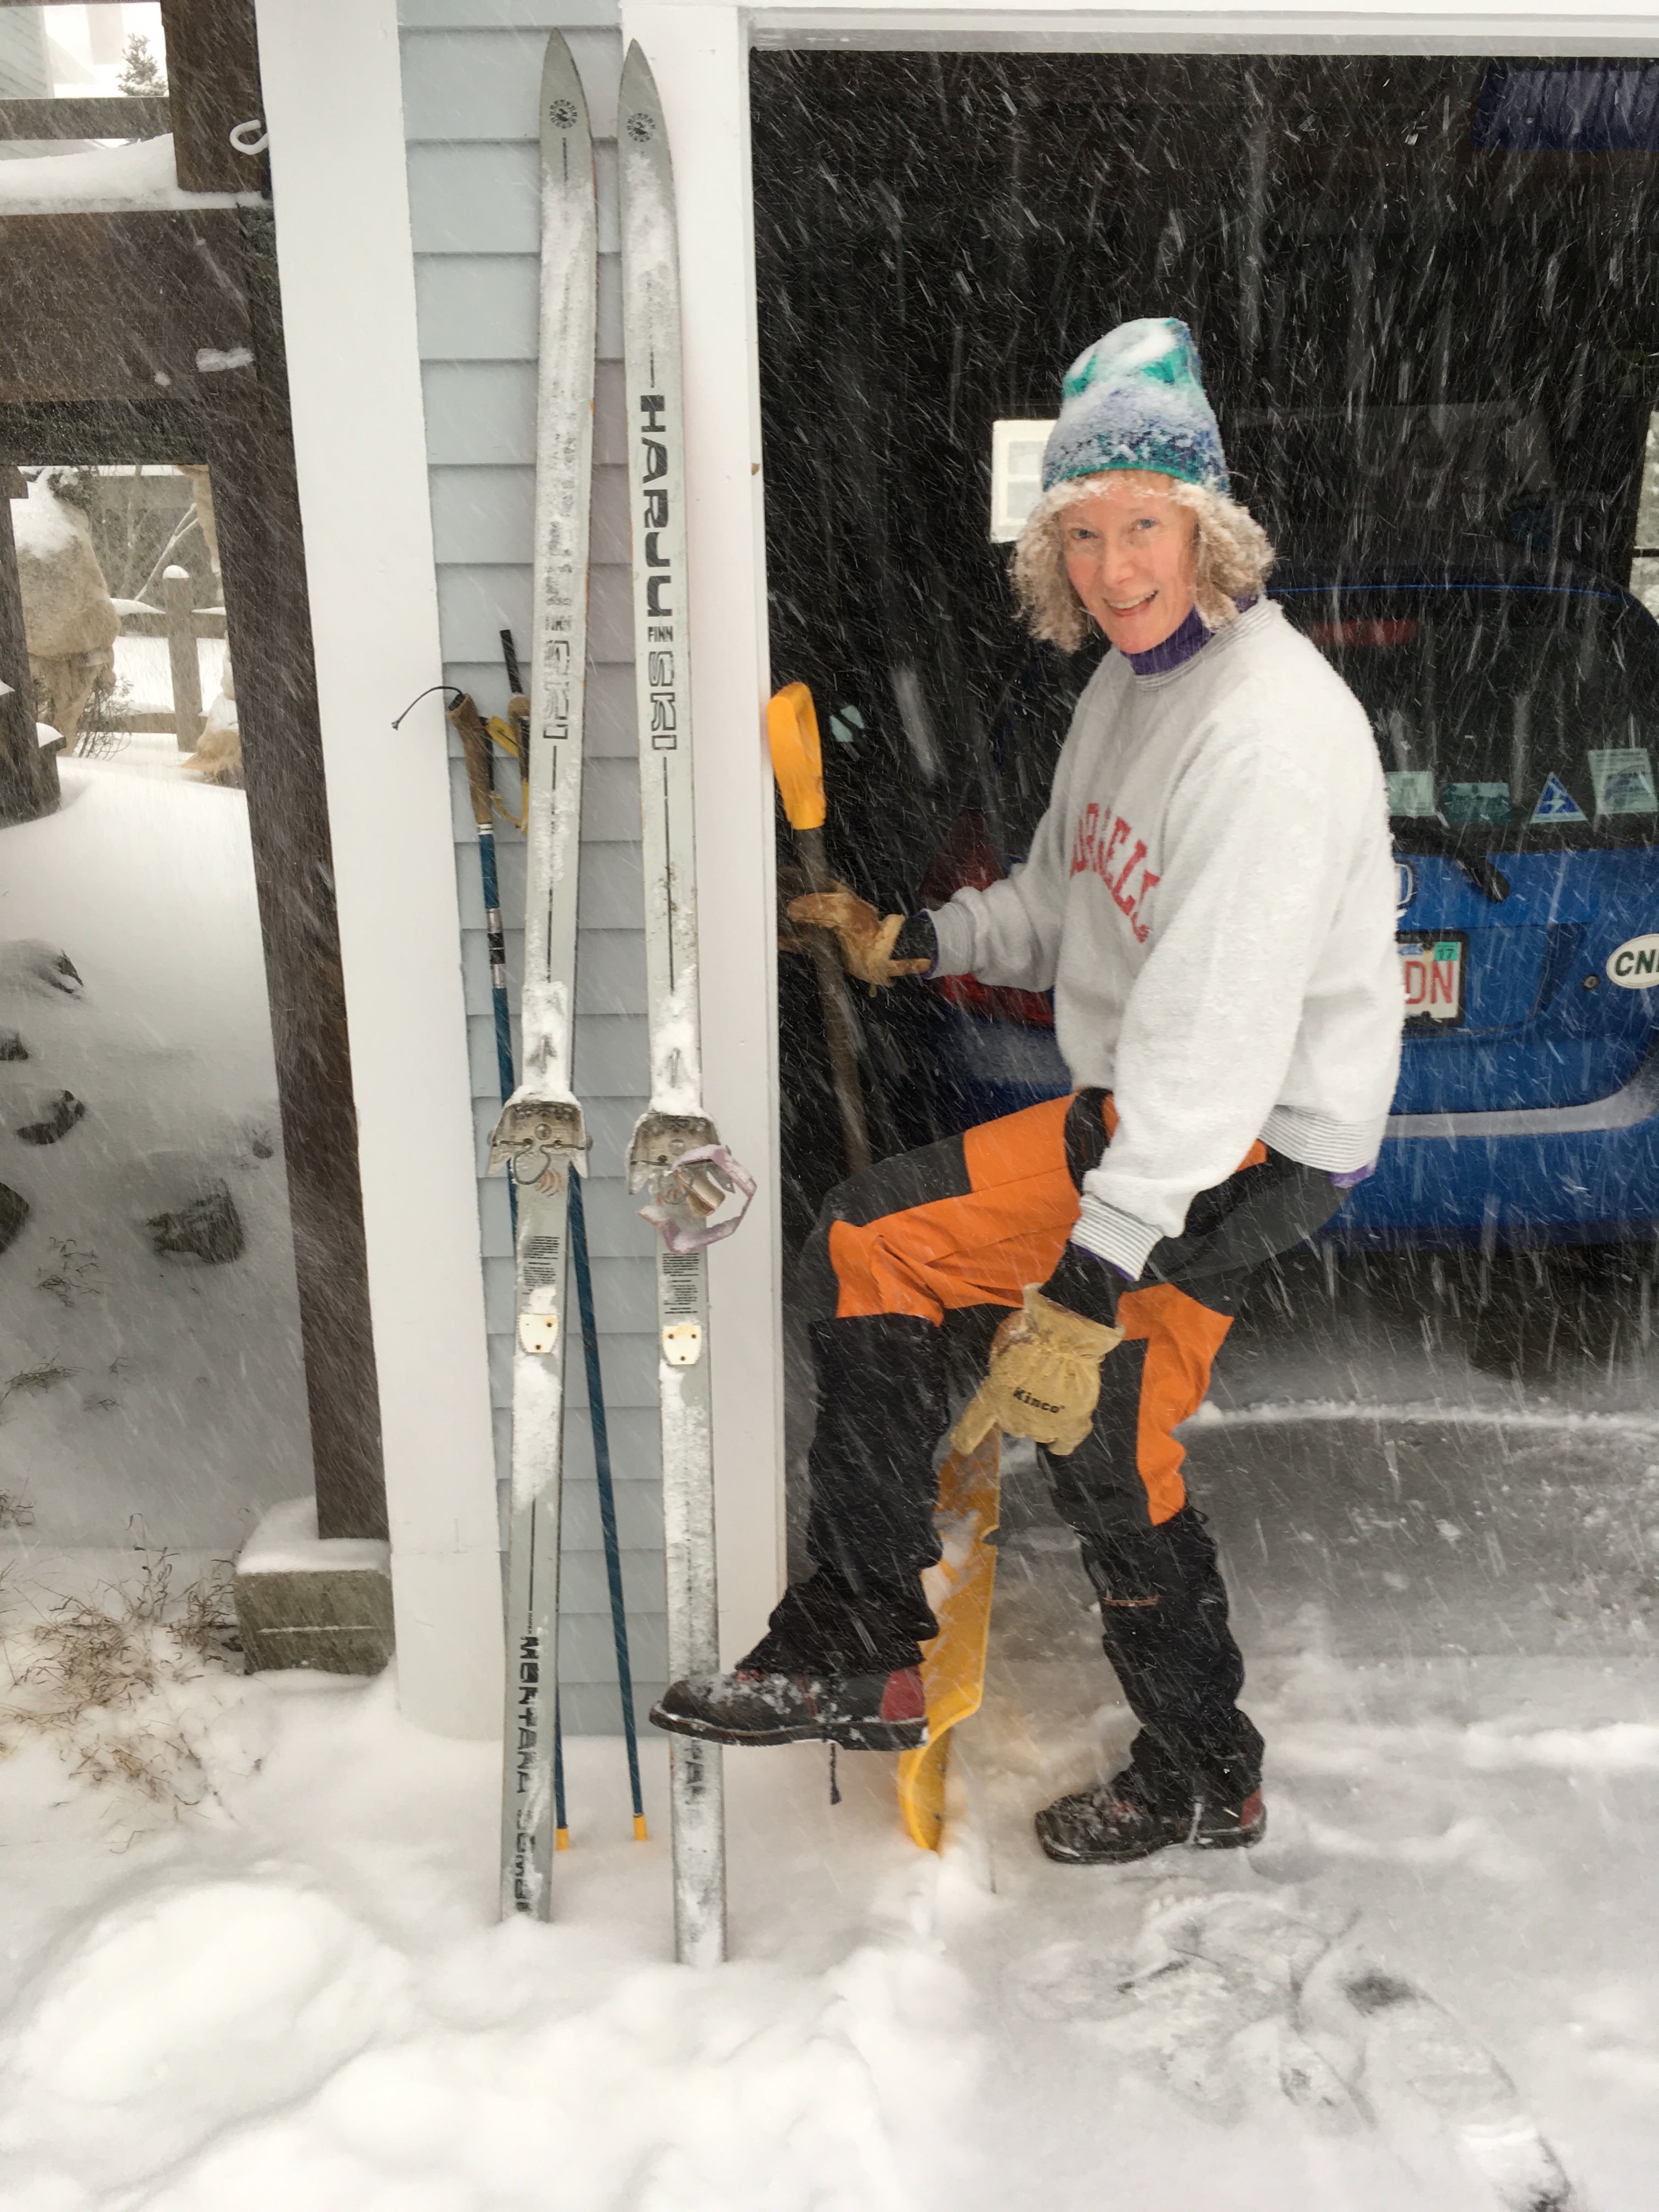 Swain modeling her mother’s 1970s era ski gear. “It’s still going strong! Wooden waxless skis with real mohair strips, and leather boots with no insulation whatsoever! Perfect for New England winters,” she jokes.